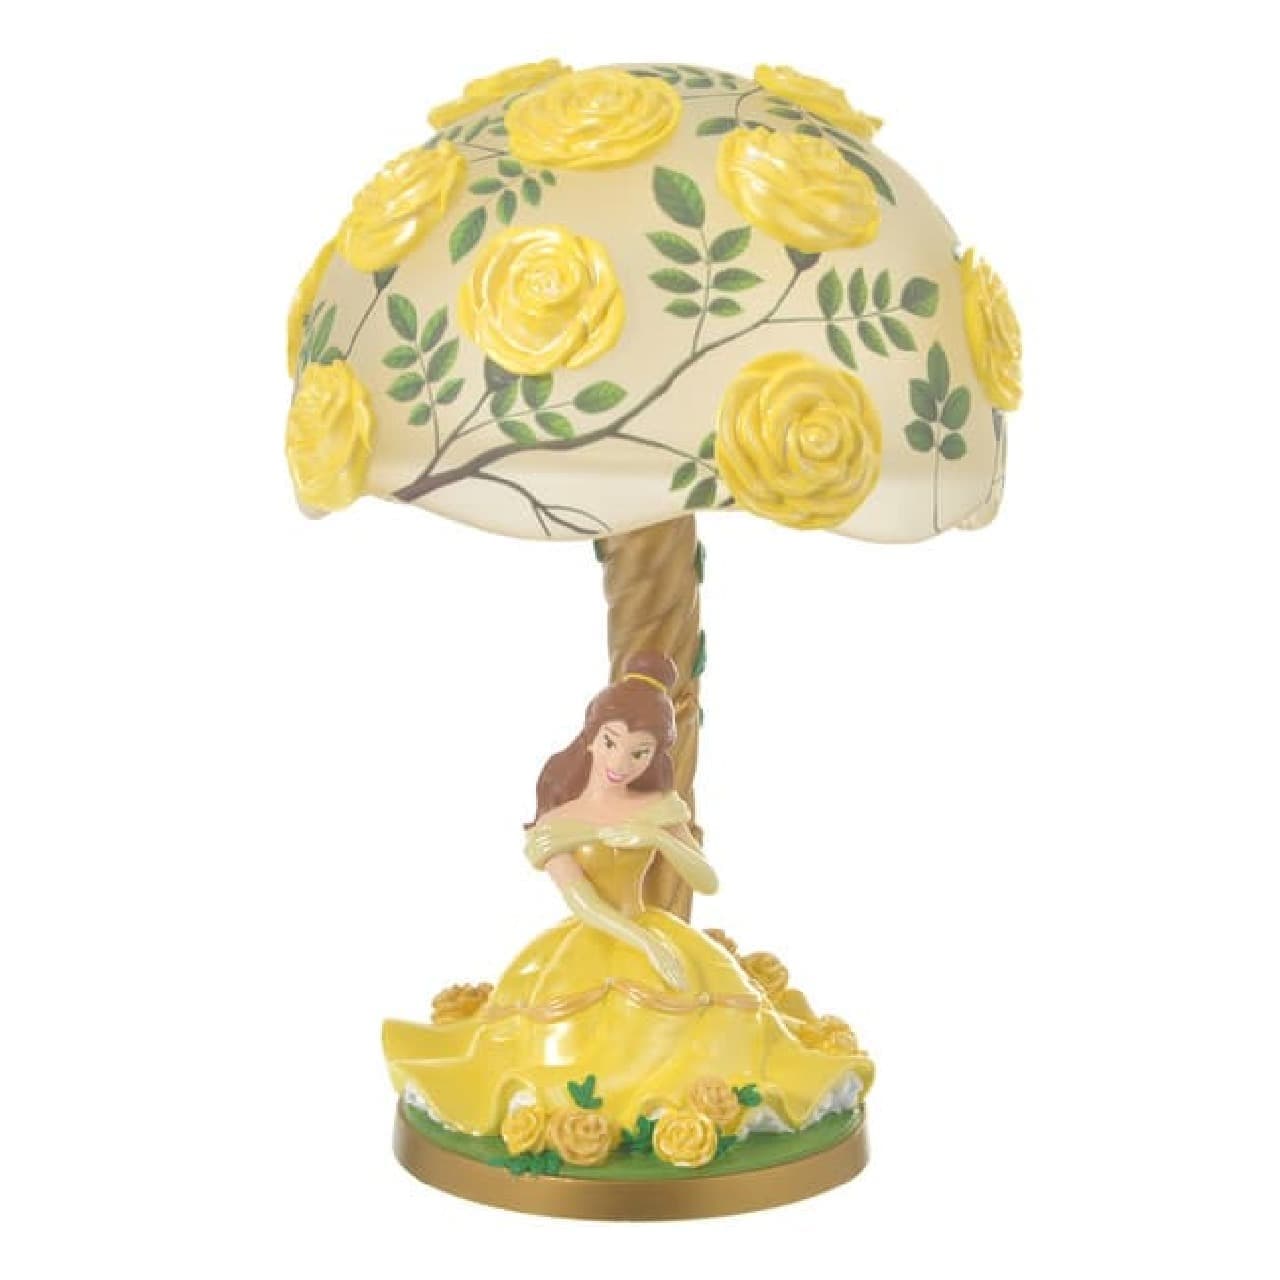 Disney Store "FLOWER PRINCESS" collection is now available! Designs such as the bell of "Beauty and the Beast"